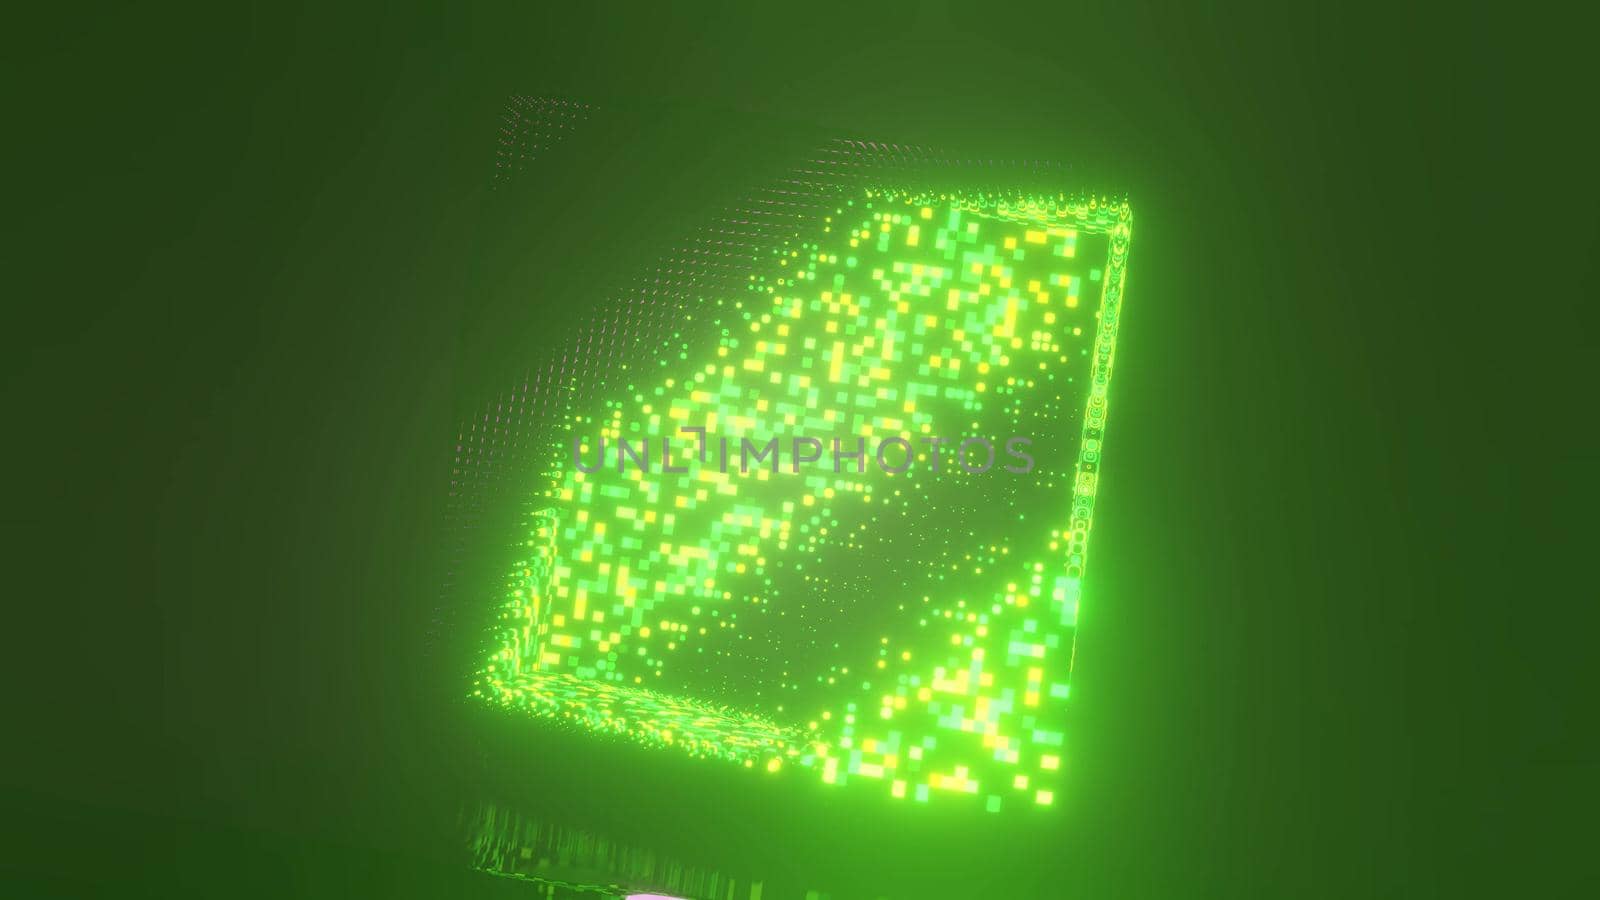 Abstract 3d illustration made of green small cubes forming bright diamond shaped pattern in 4K UHD quality